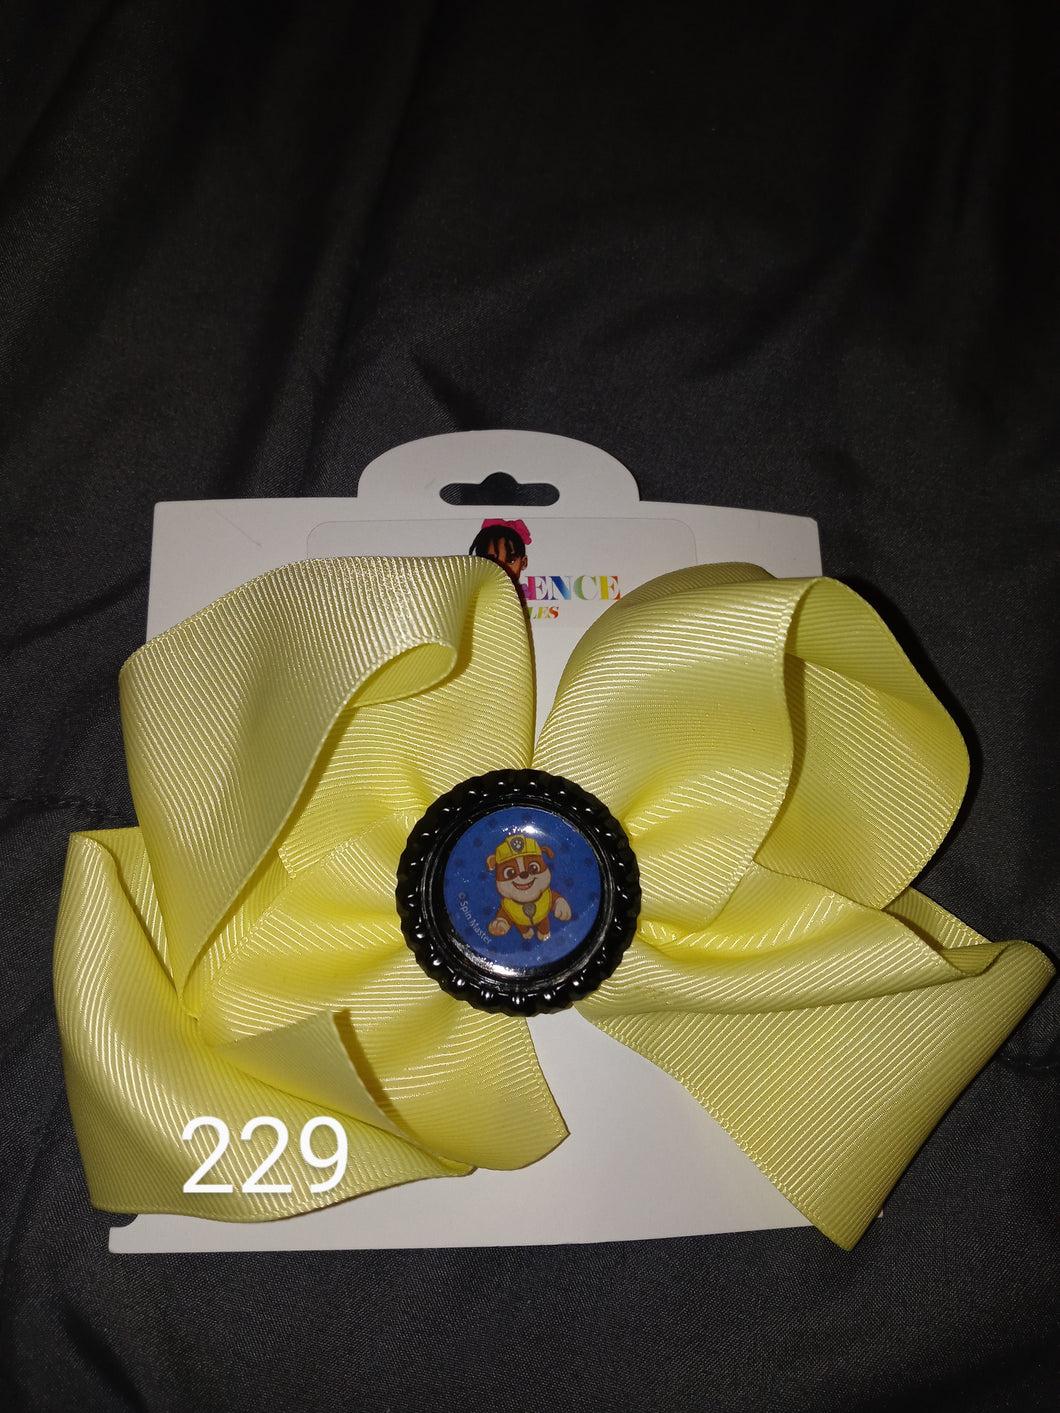 6 Inch Solid Colored Hair Bow with Paw Patrol